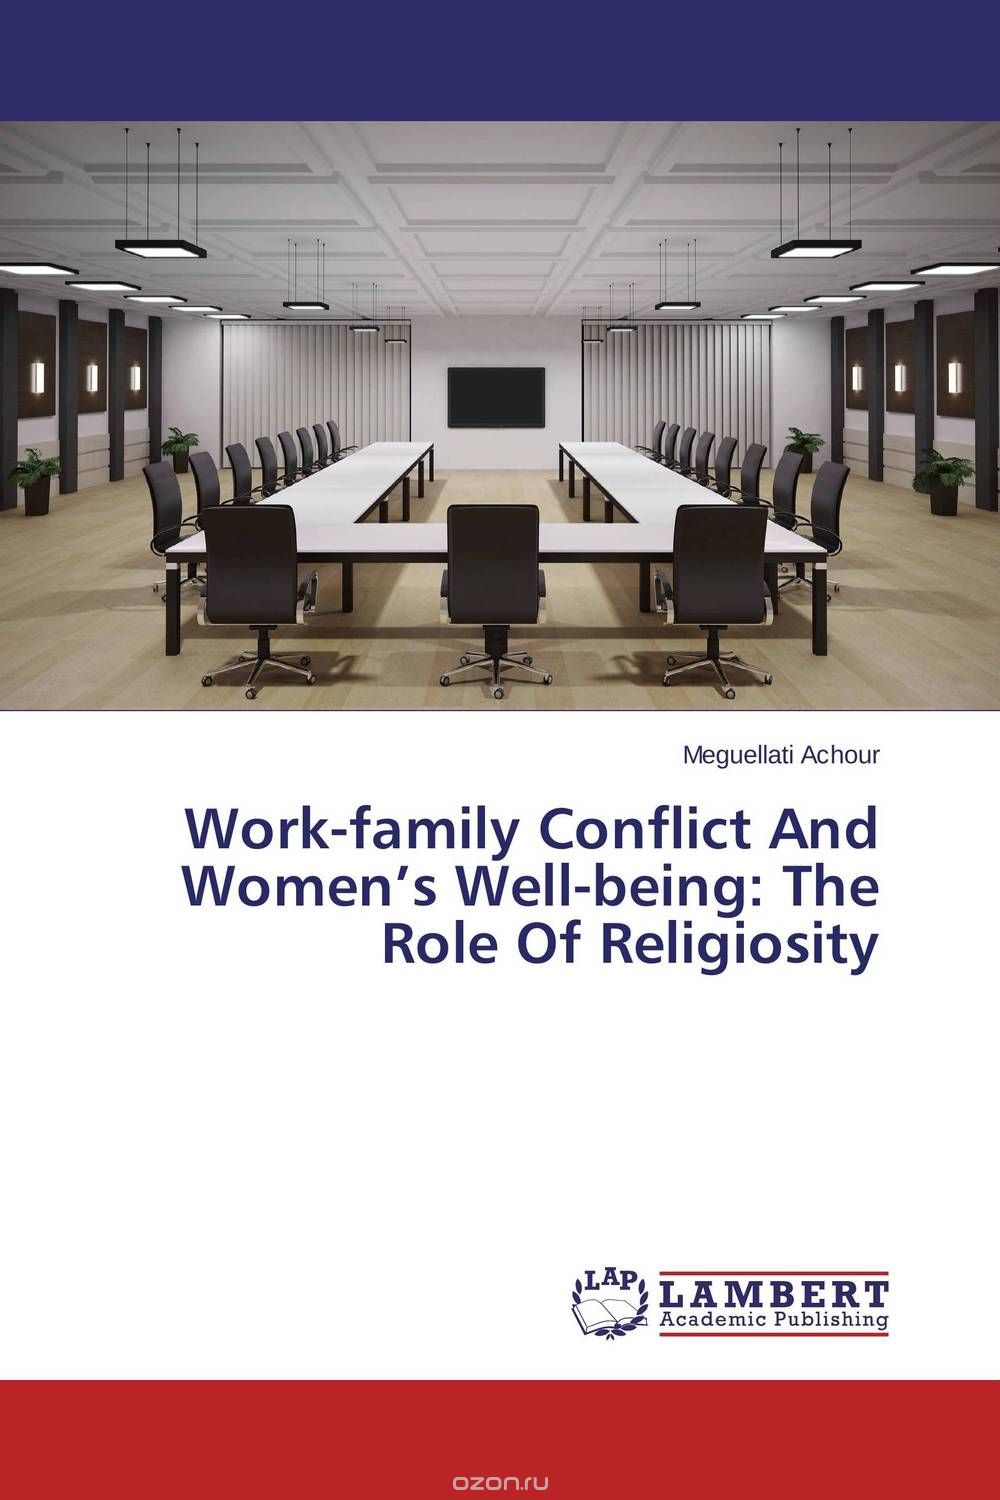 Work-family Conflict And Women’s Well-being: The Role Of Religiosity